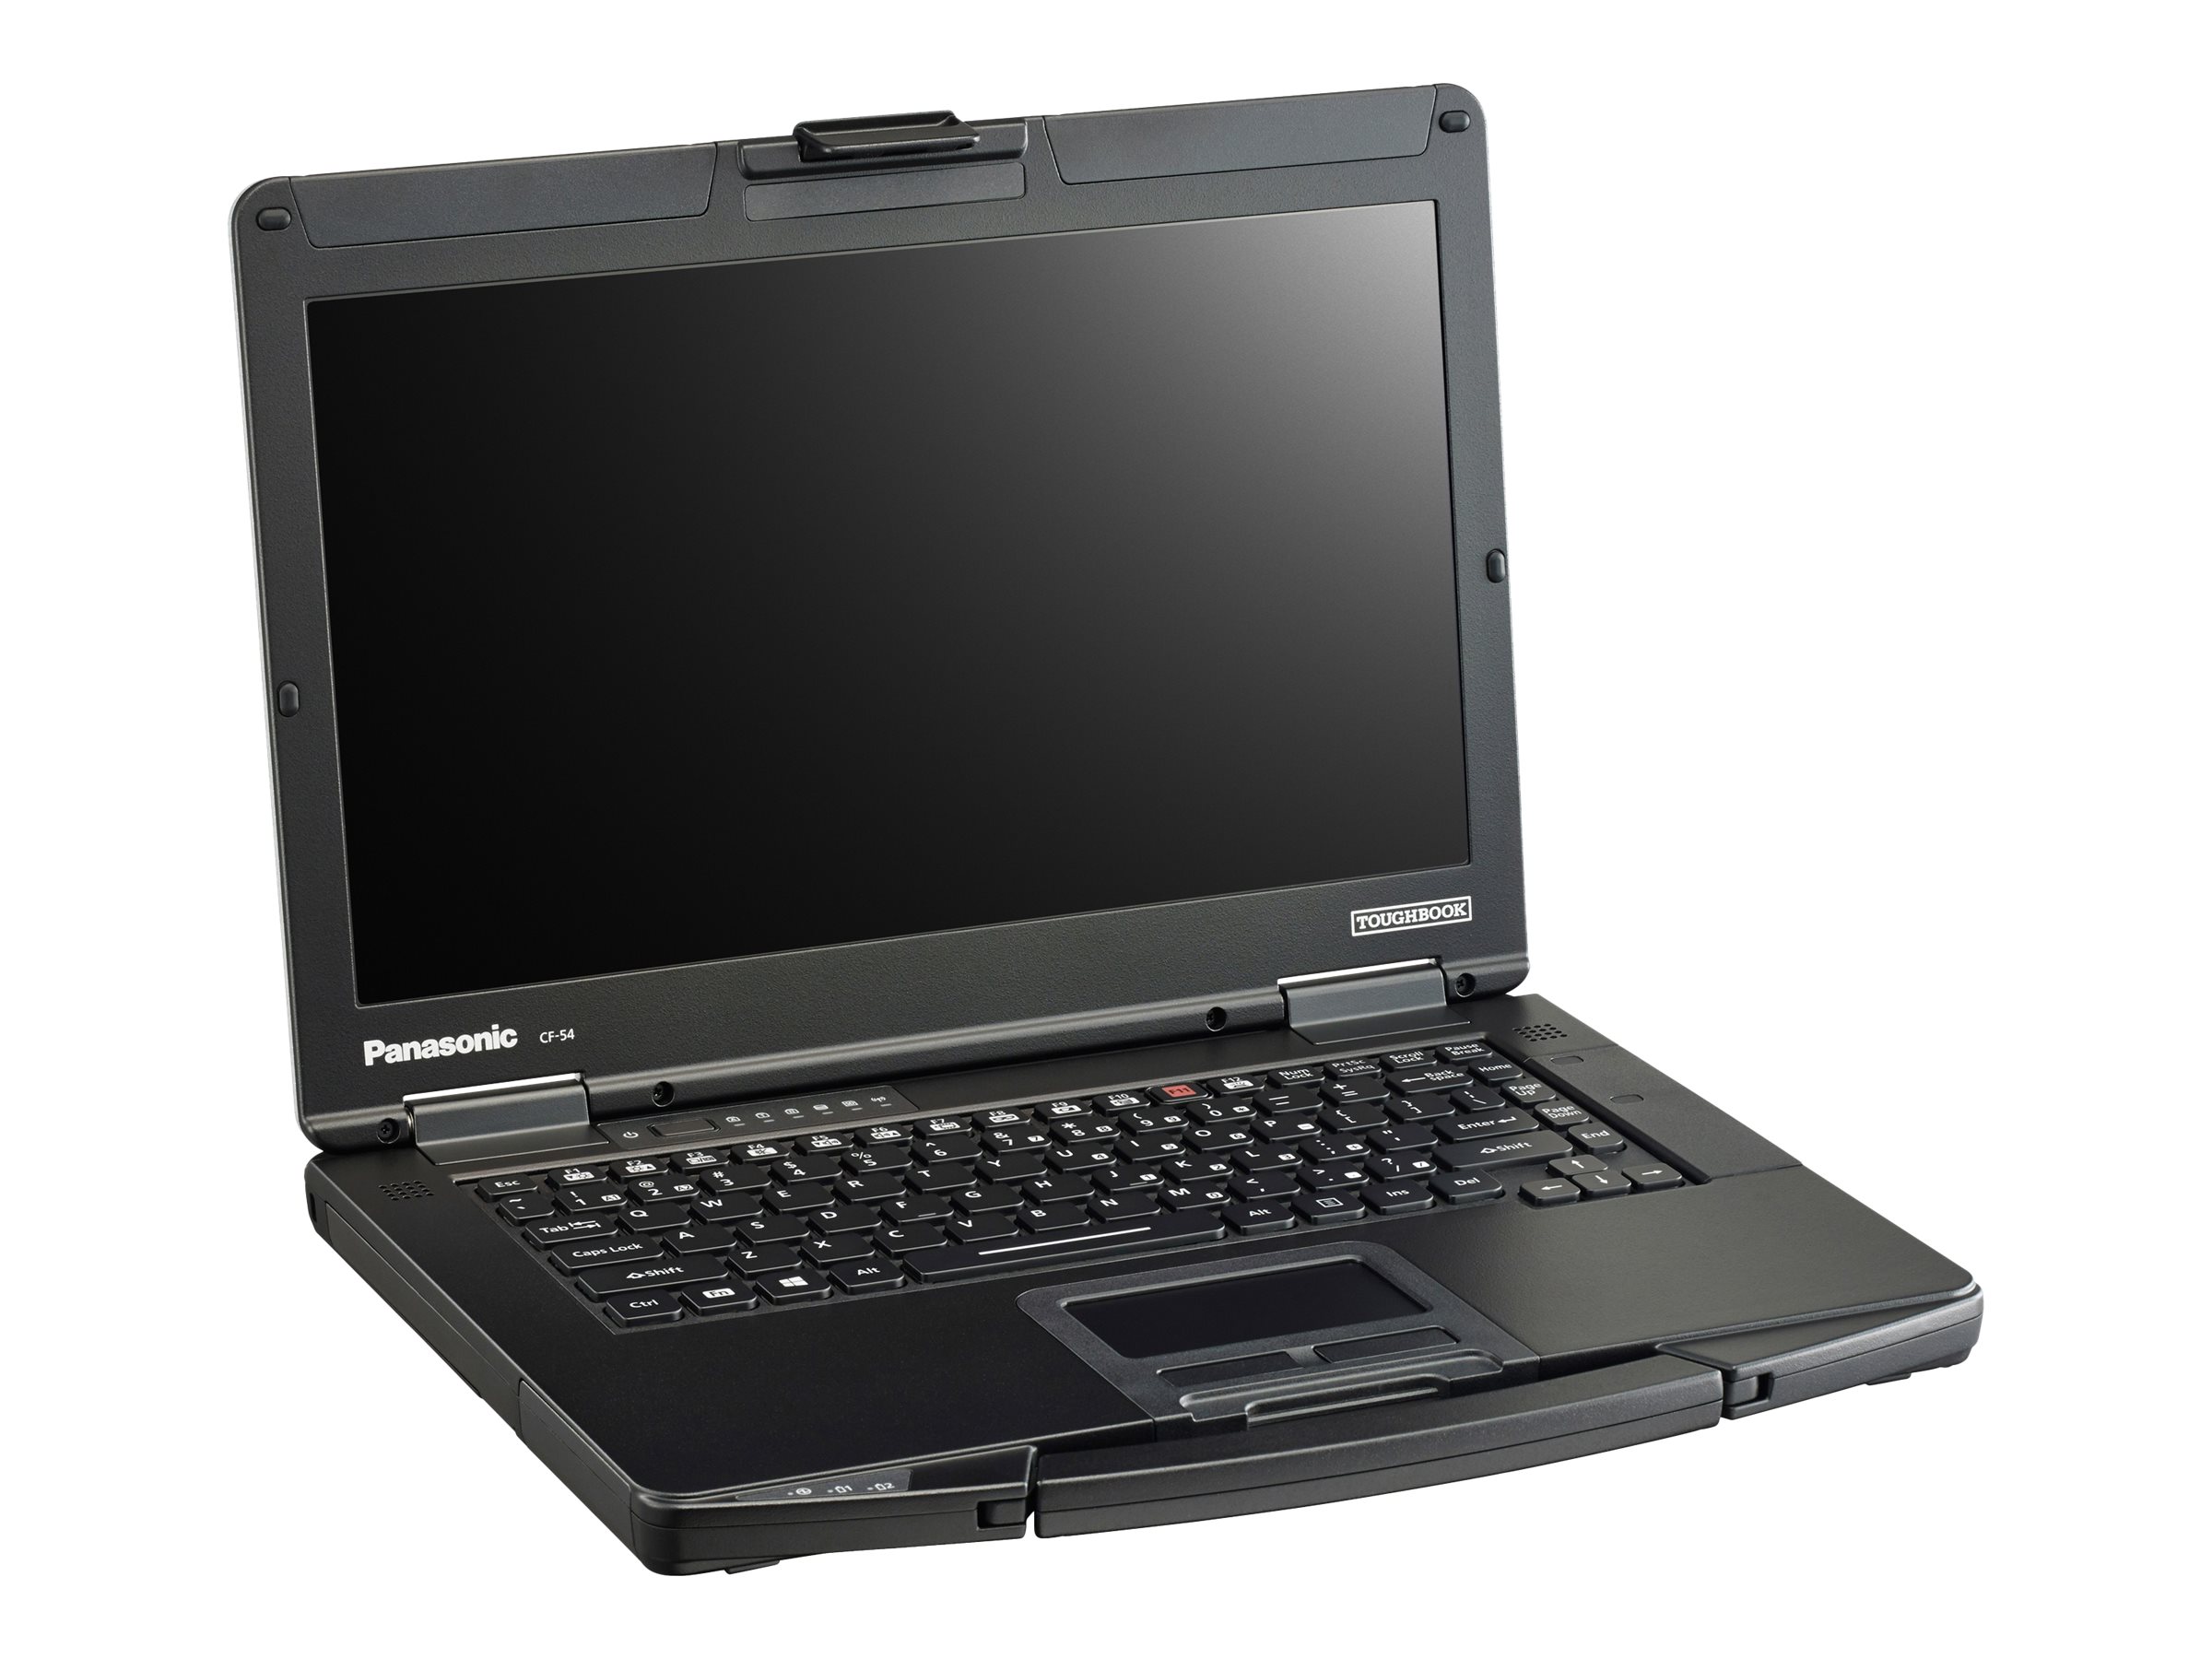 Panasonic Toughbook 54 Prime - Rugged - Intel Core i7 - 6600U / up to 3.4 GHz - vPro - Win 10 Pro 64-bit - HD Graphics 520 - 8 GB RAM - 256 GB SSD - DVD SuperMulti - 14" 1366 x 768 (HD) - Wi-Fi 5 - with Toughbook Preferred - image 4 of 16